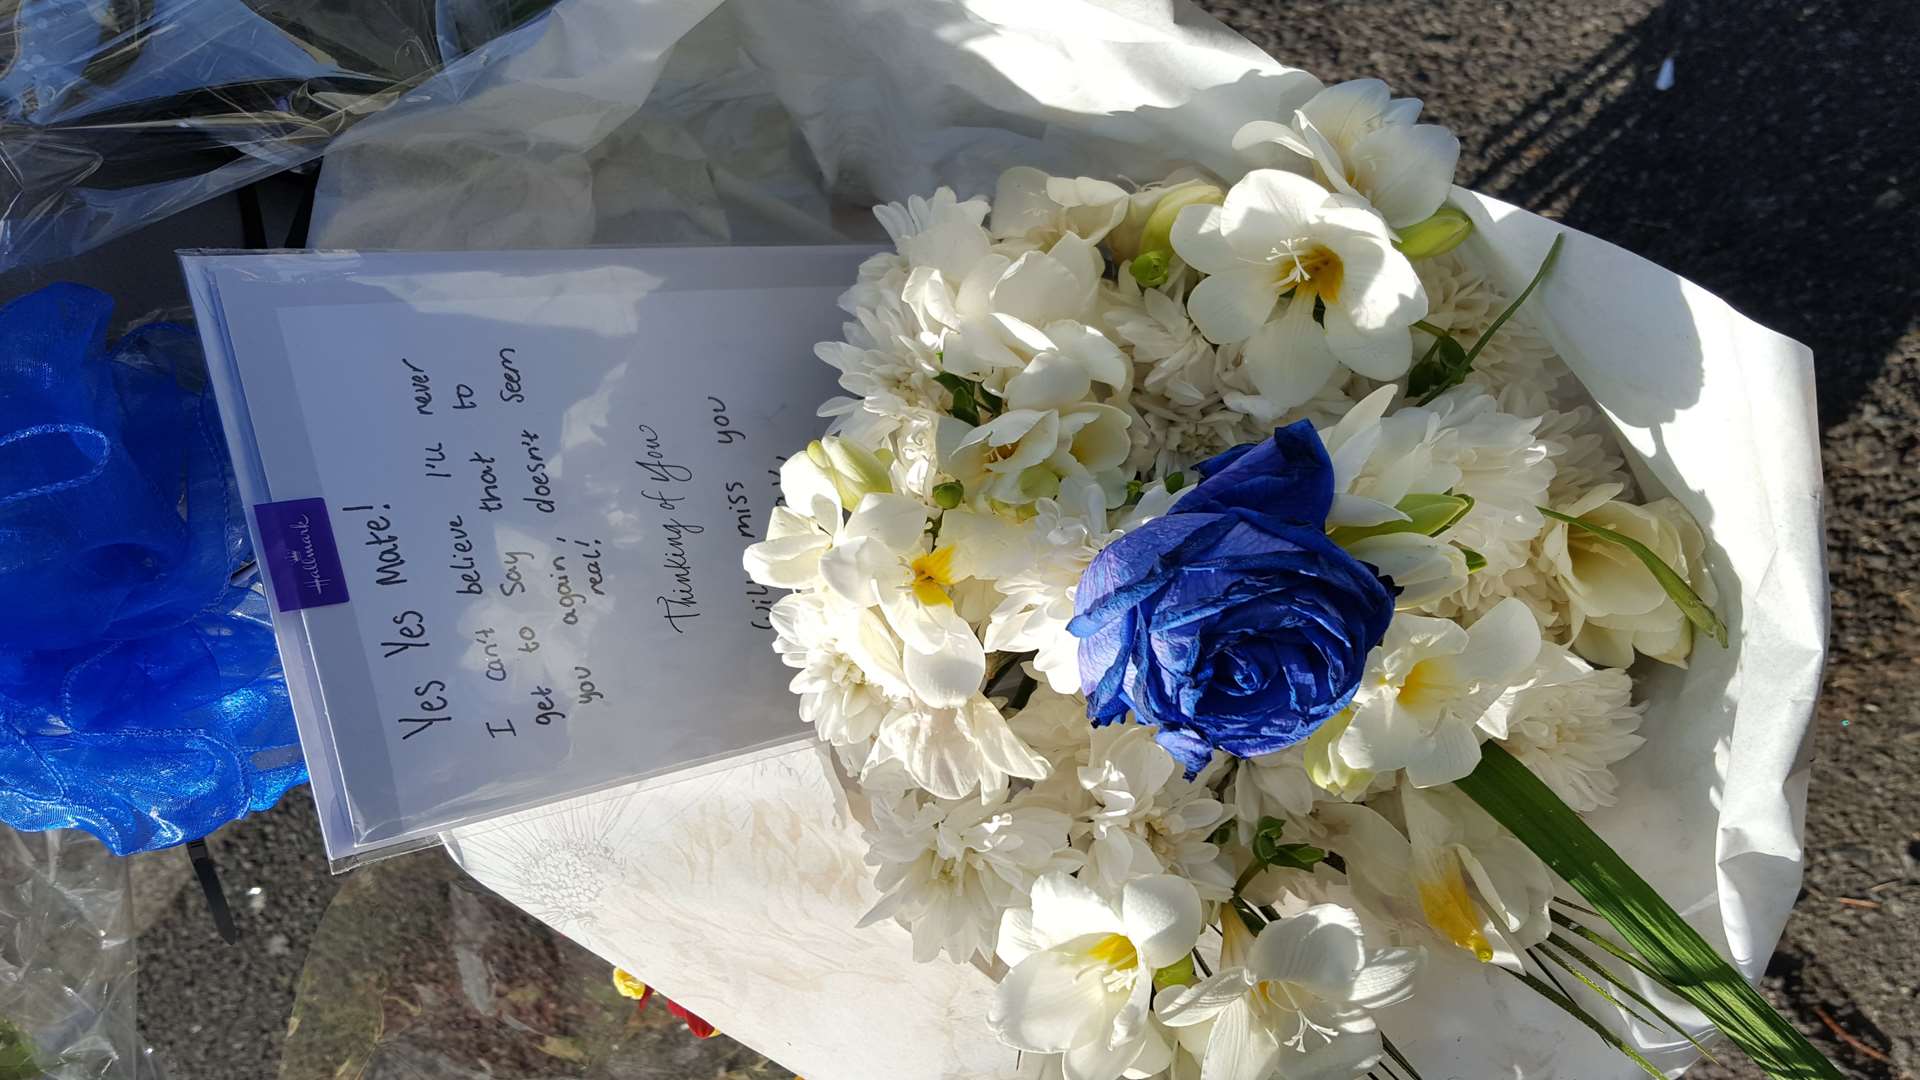 Tributes were left in both Shepherds Lane and Heather Drive